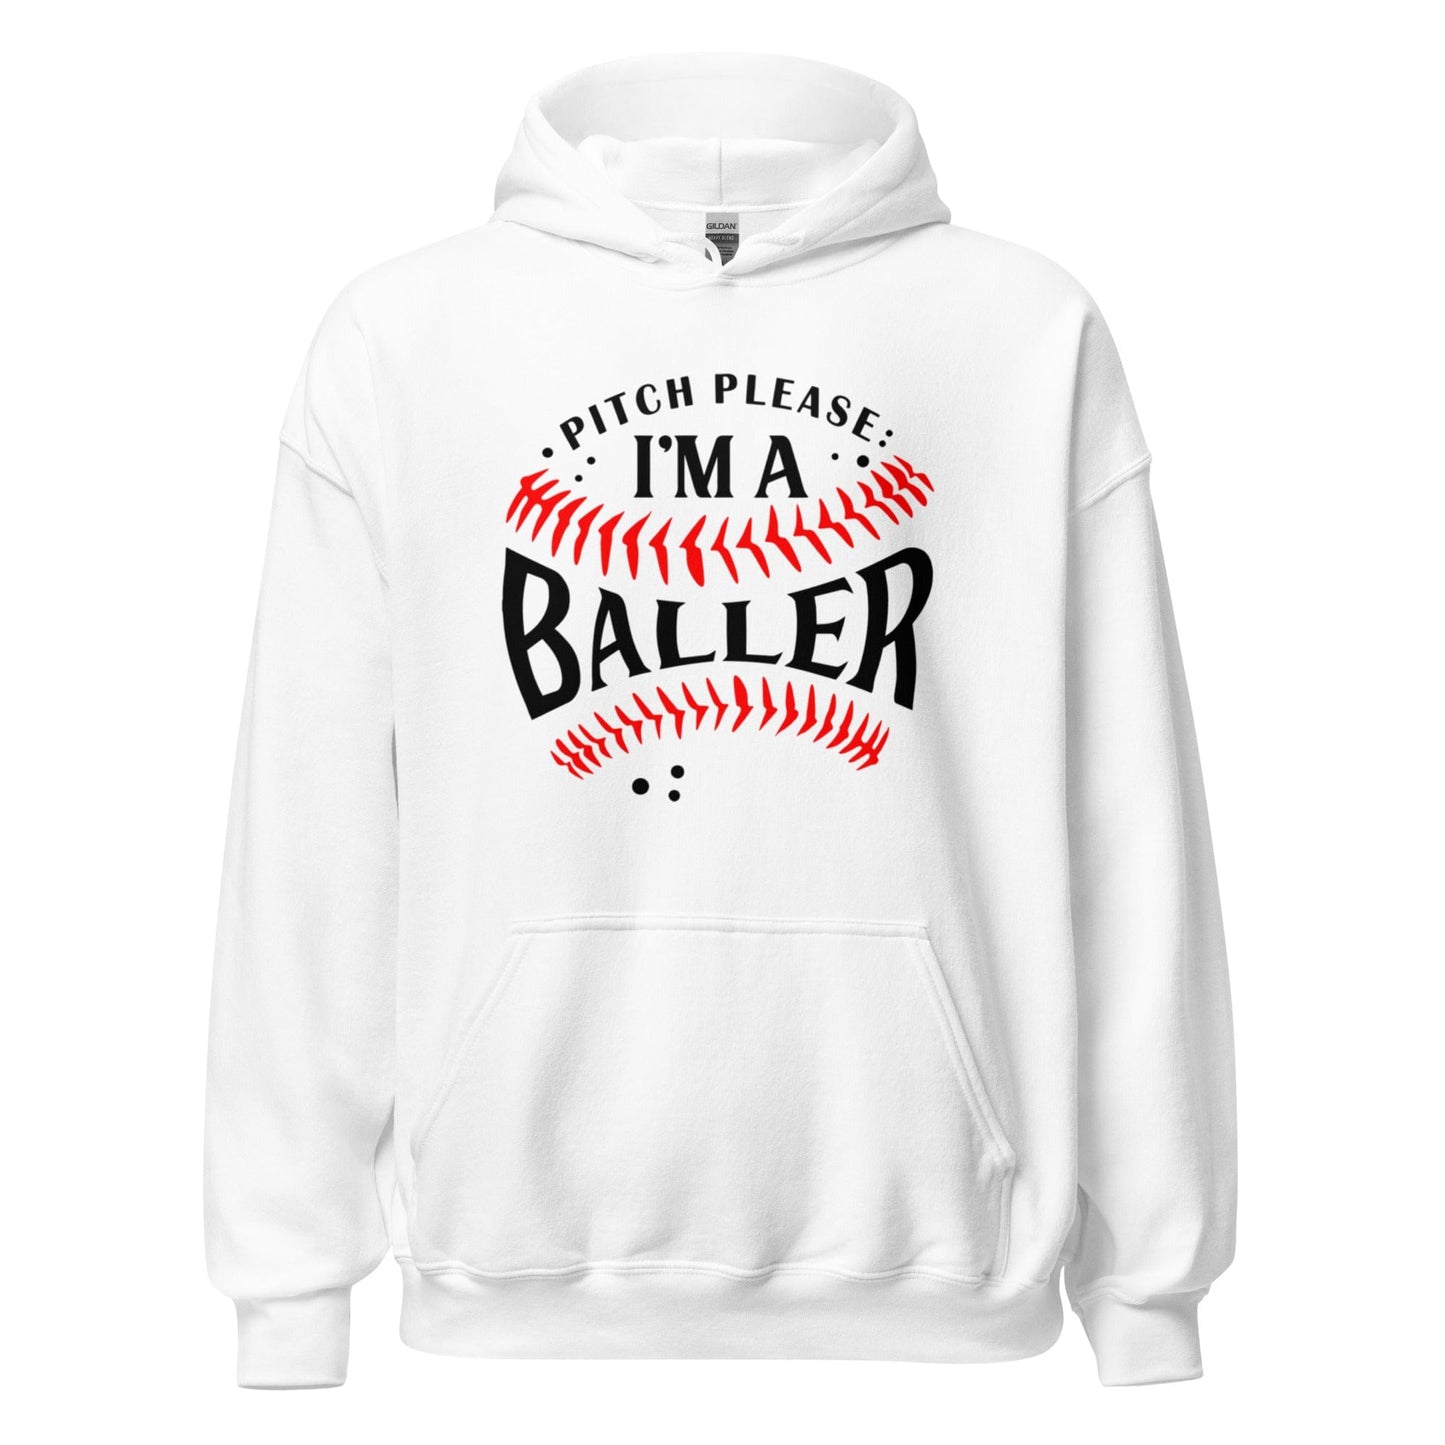 Pitch Please I'm A Baller - Adult Hoodie